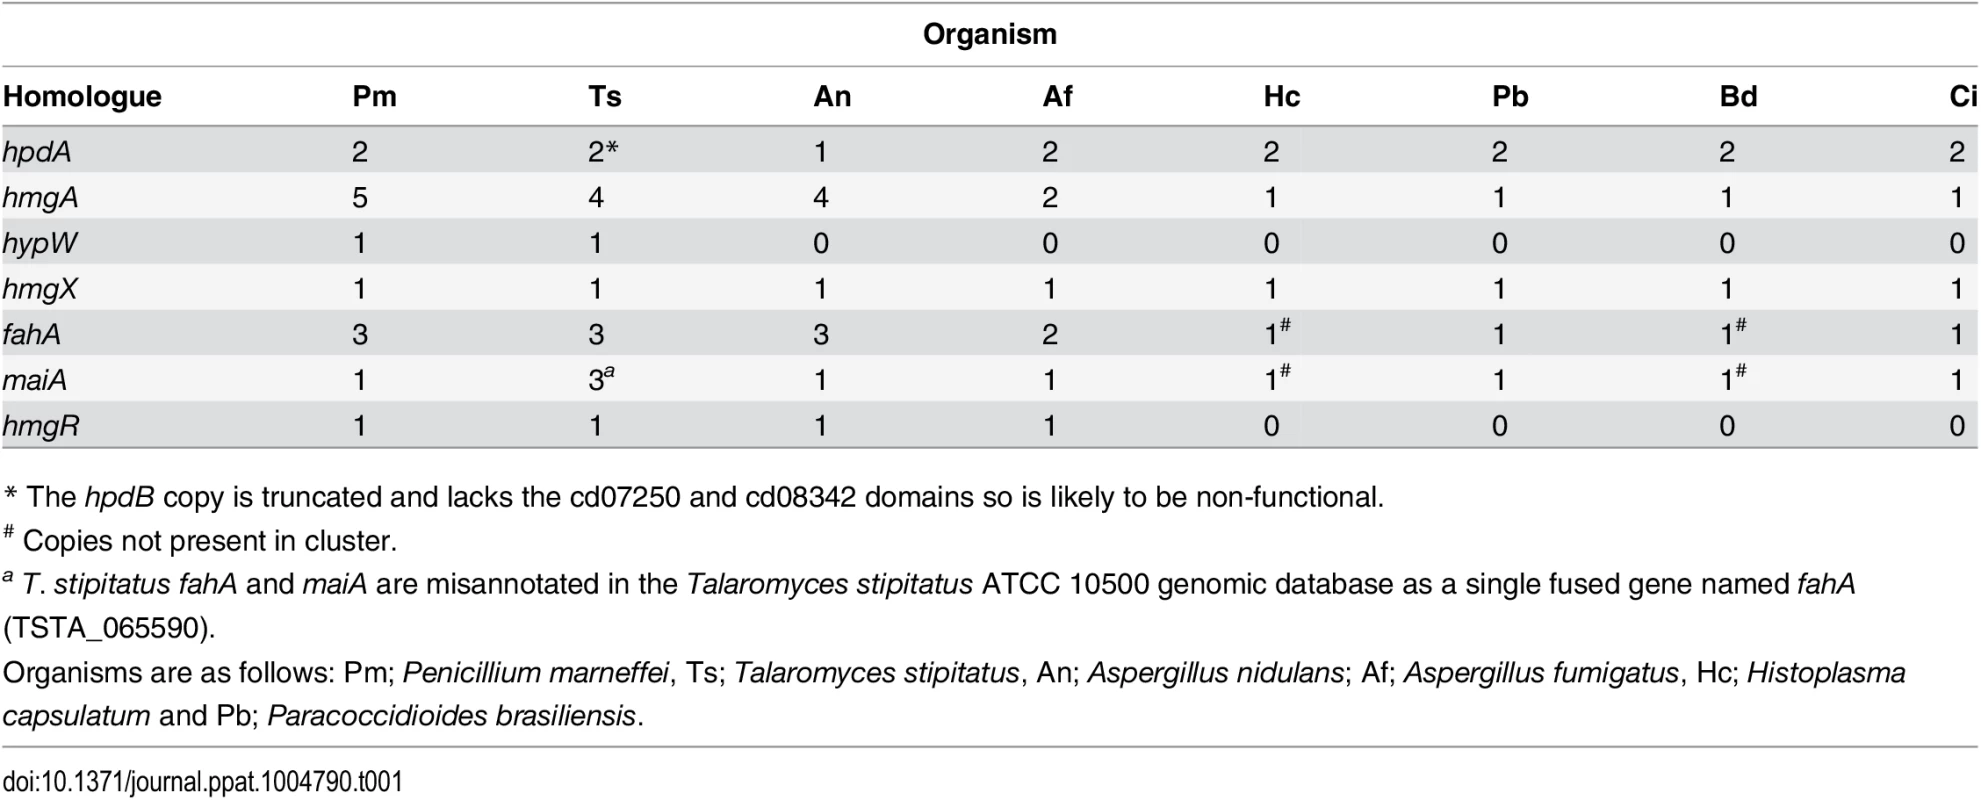 Paralogues of tyrosine catabolic cluster genes.